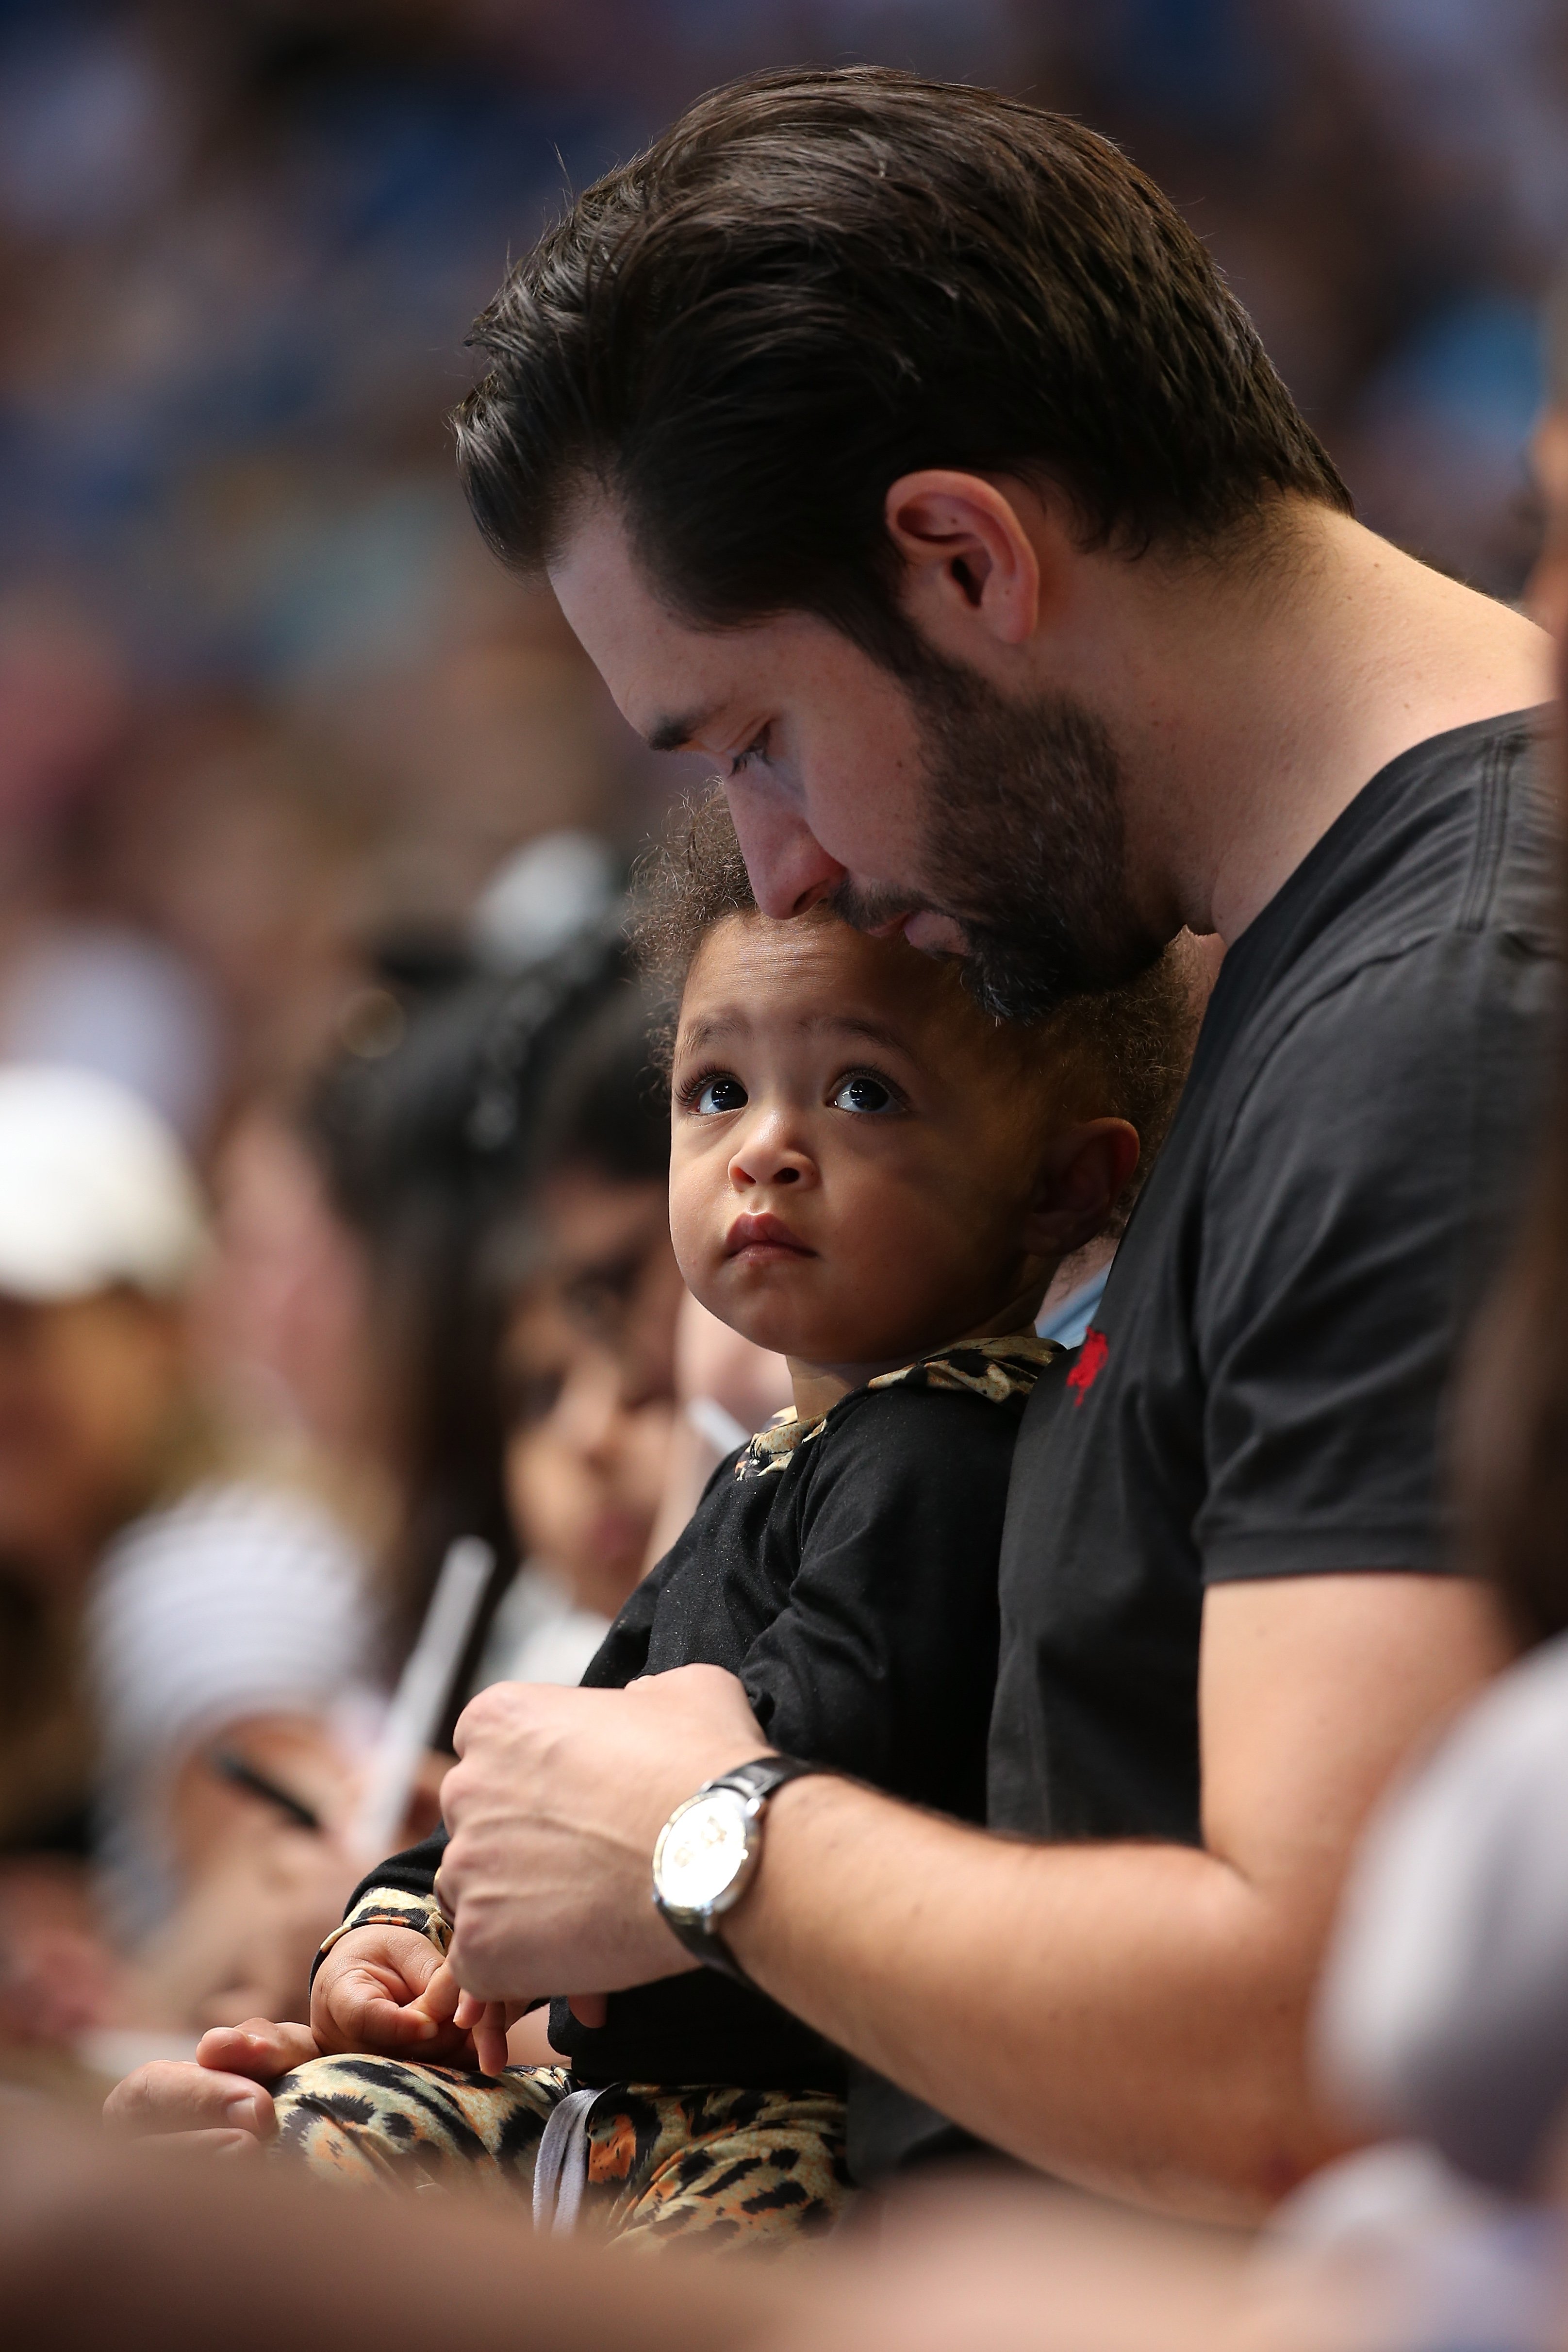 Serena Williams' husband Alexis Ohanian holds their daughter Alexis Olympia Ohanian Jr. during one of her tennis matches on January 03, 2019 in Perth, Australia. | Source: Getty Images    